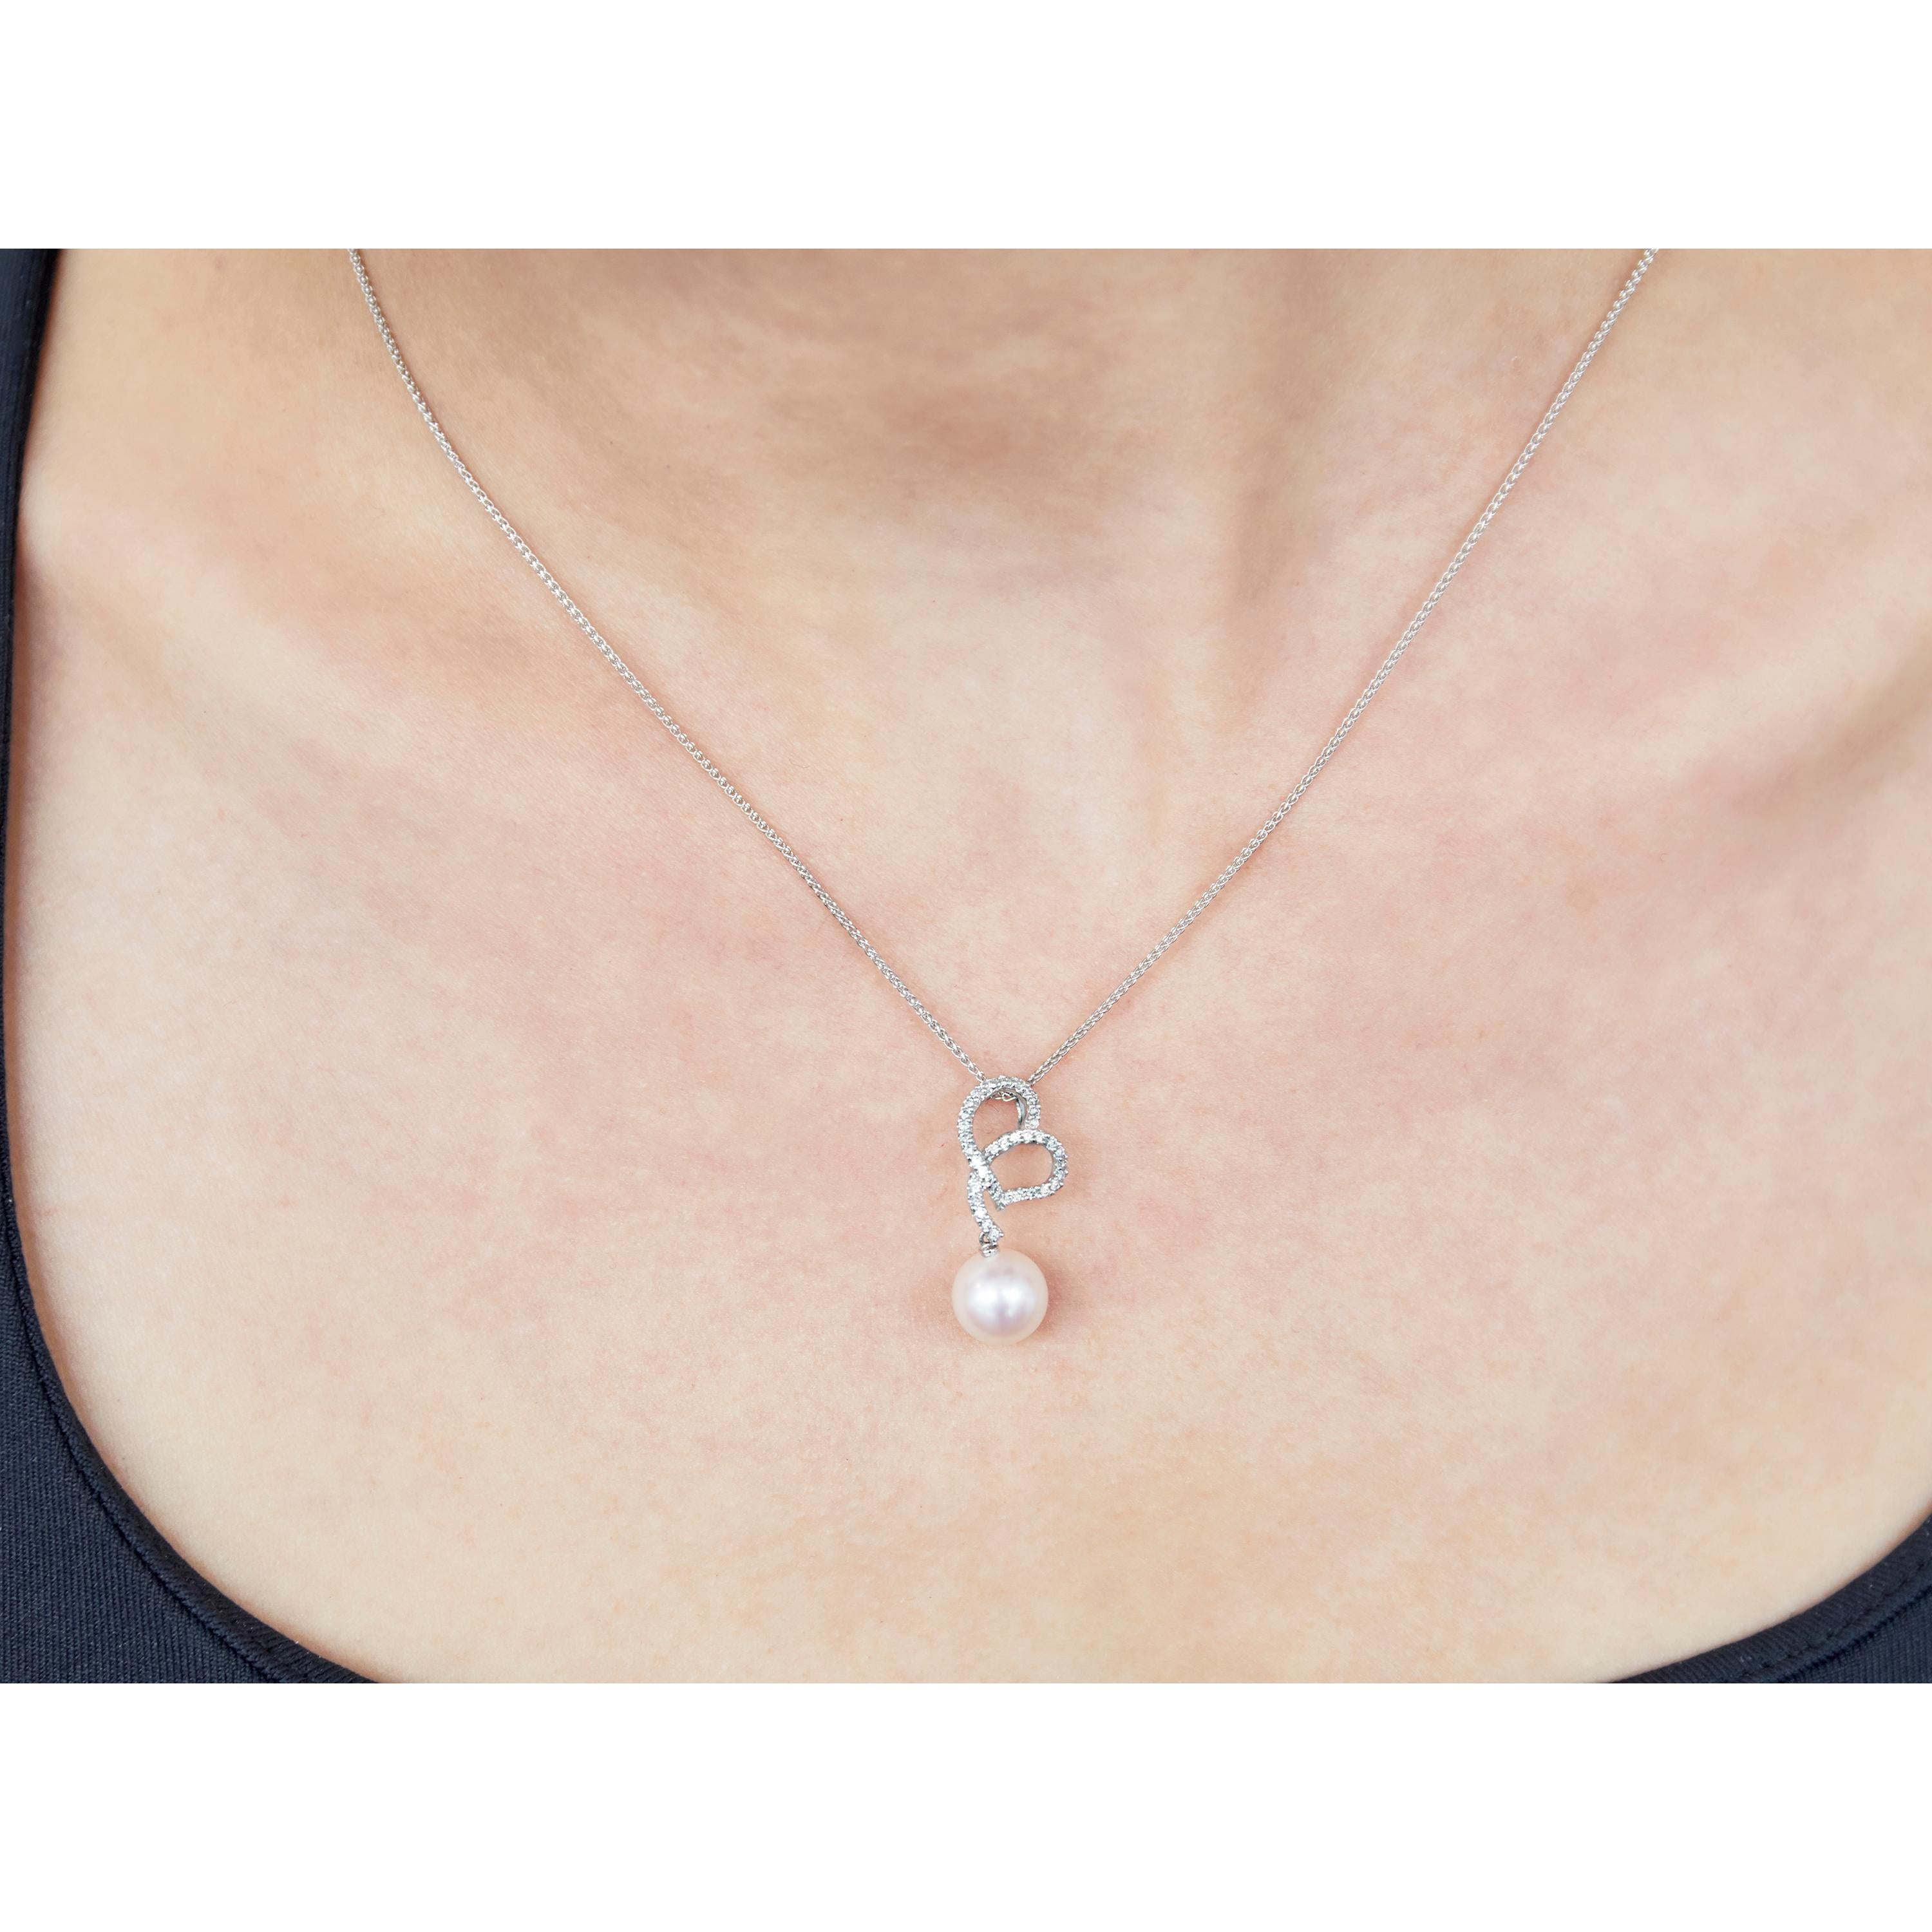 This charming pendant by Yoko London features a lustrous Freshwater pearl set beneath diamonds set in the shape of an abstract heart. The 18 Karat white gold setting serves to perfectly enrich the lustre of the pearl and the sparkle of the diamonds.